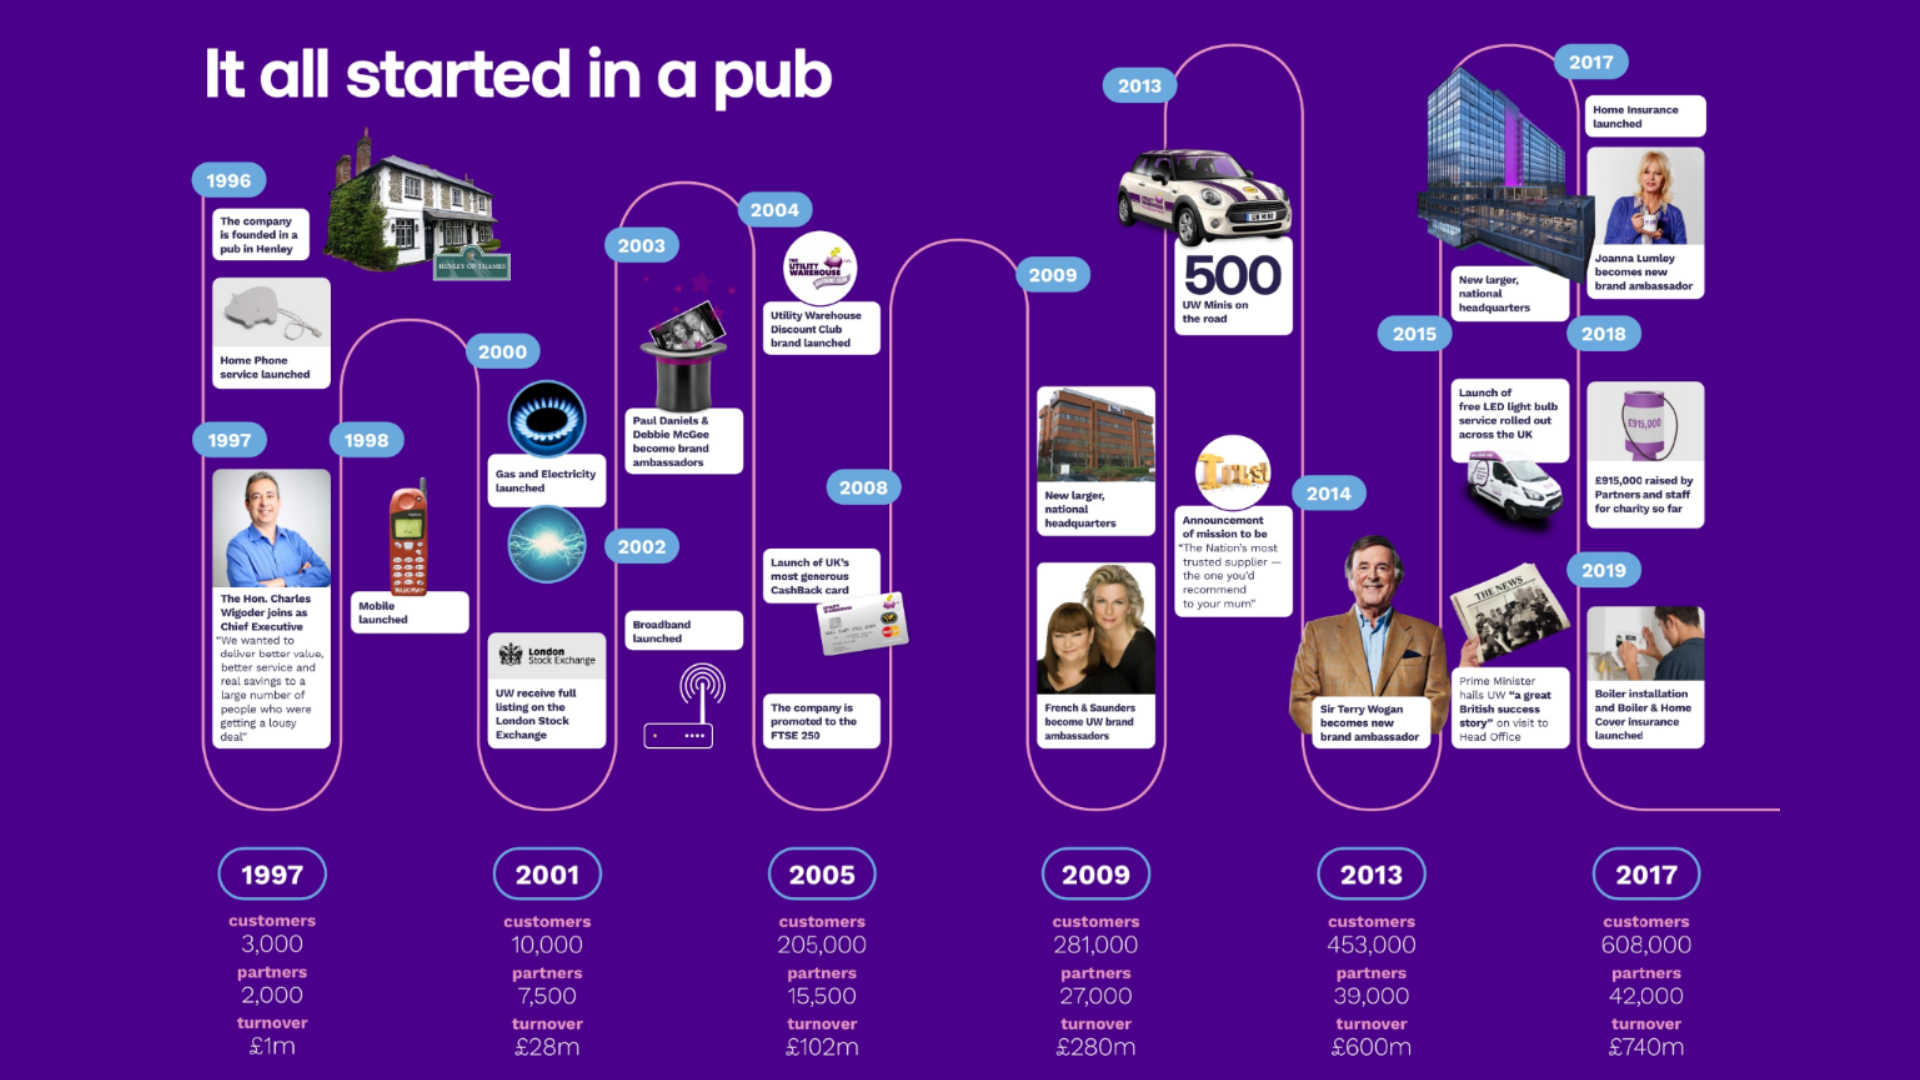 Utility Warehouse distributor rewards and benefits all started in a pub